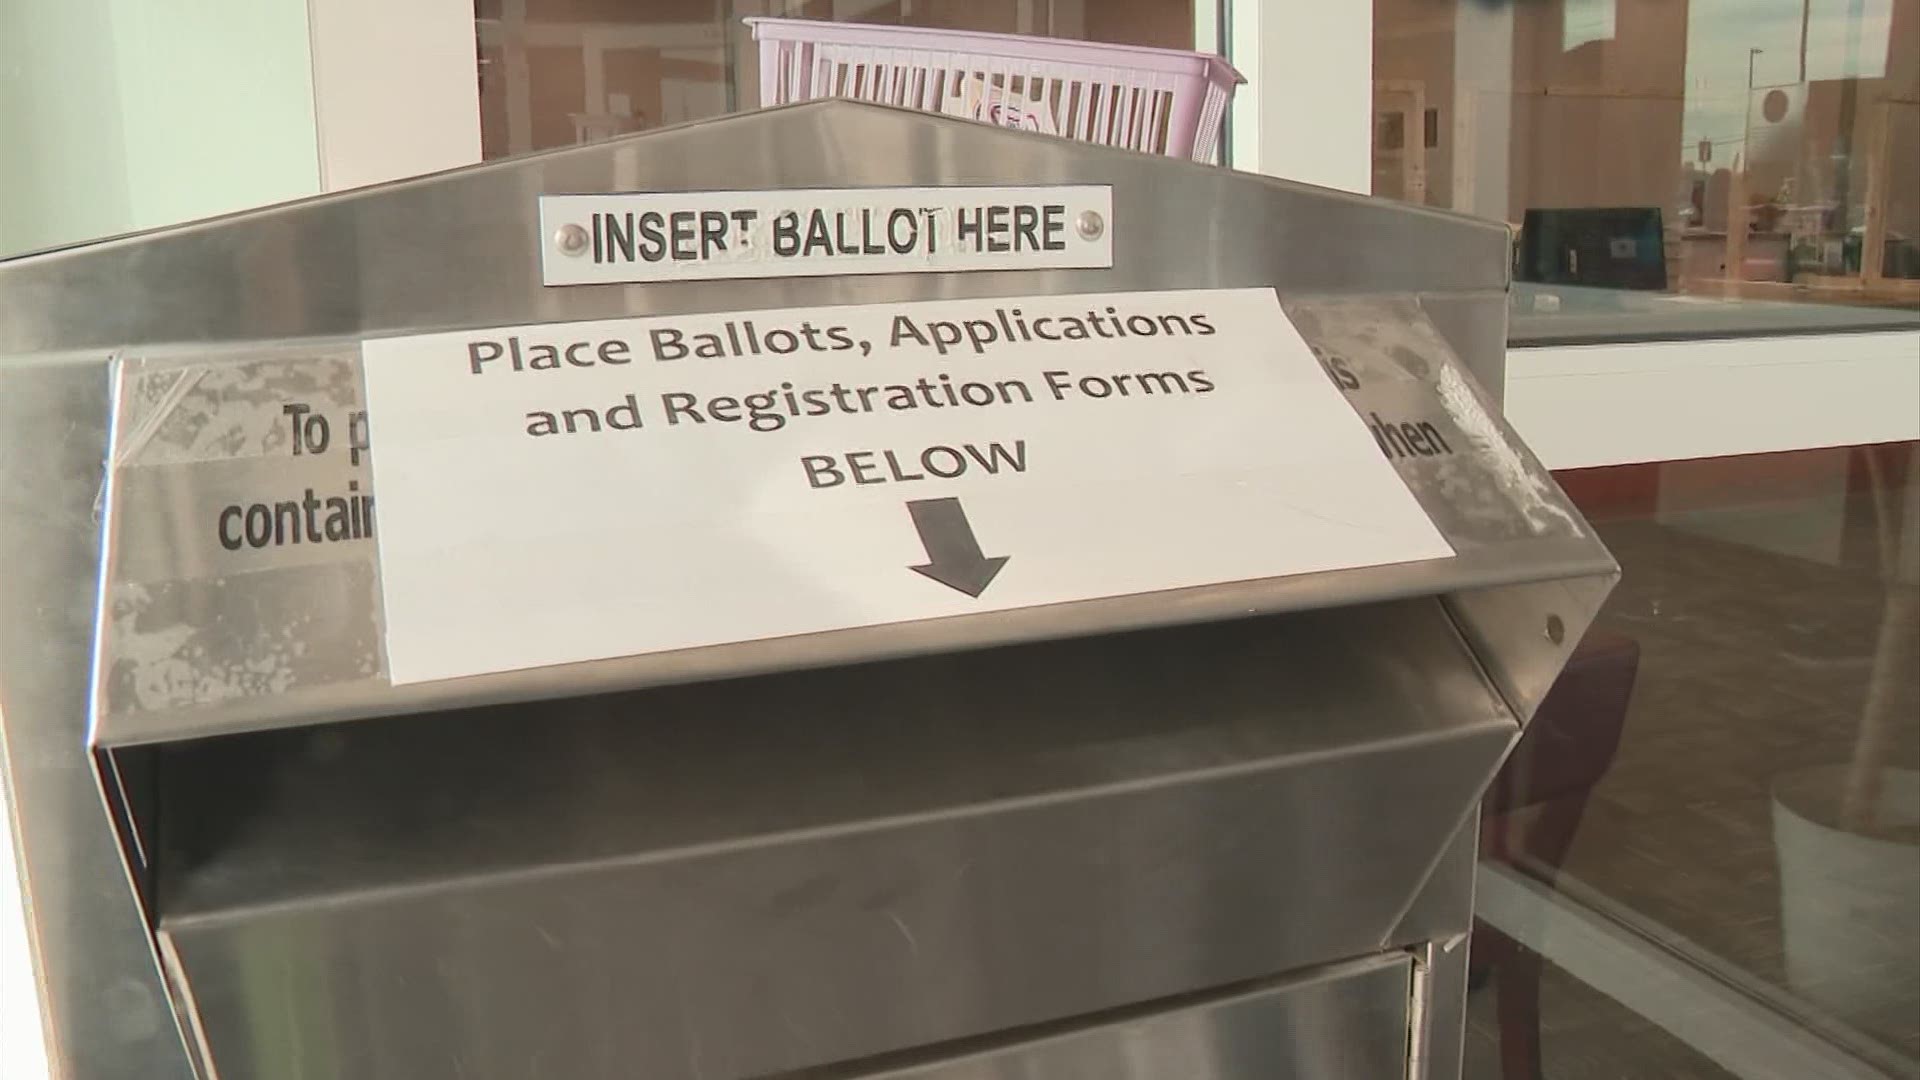 Several organizations pushing for more ballot boxes ahead of elections.